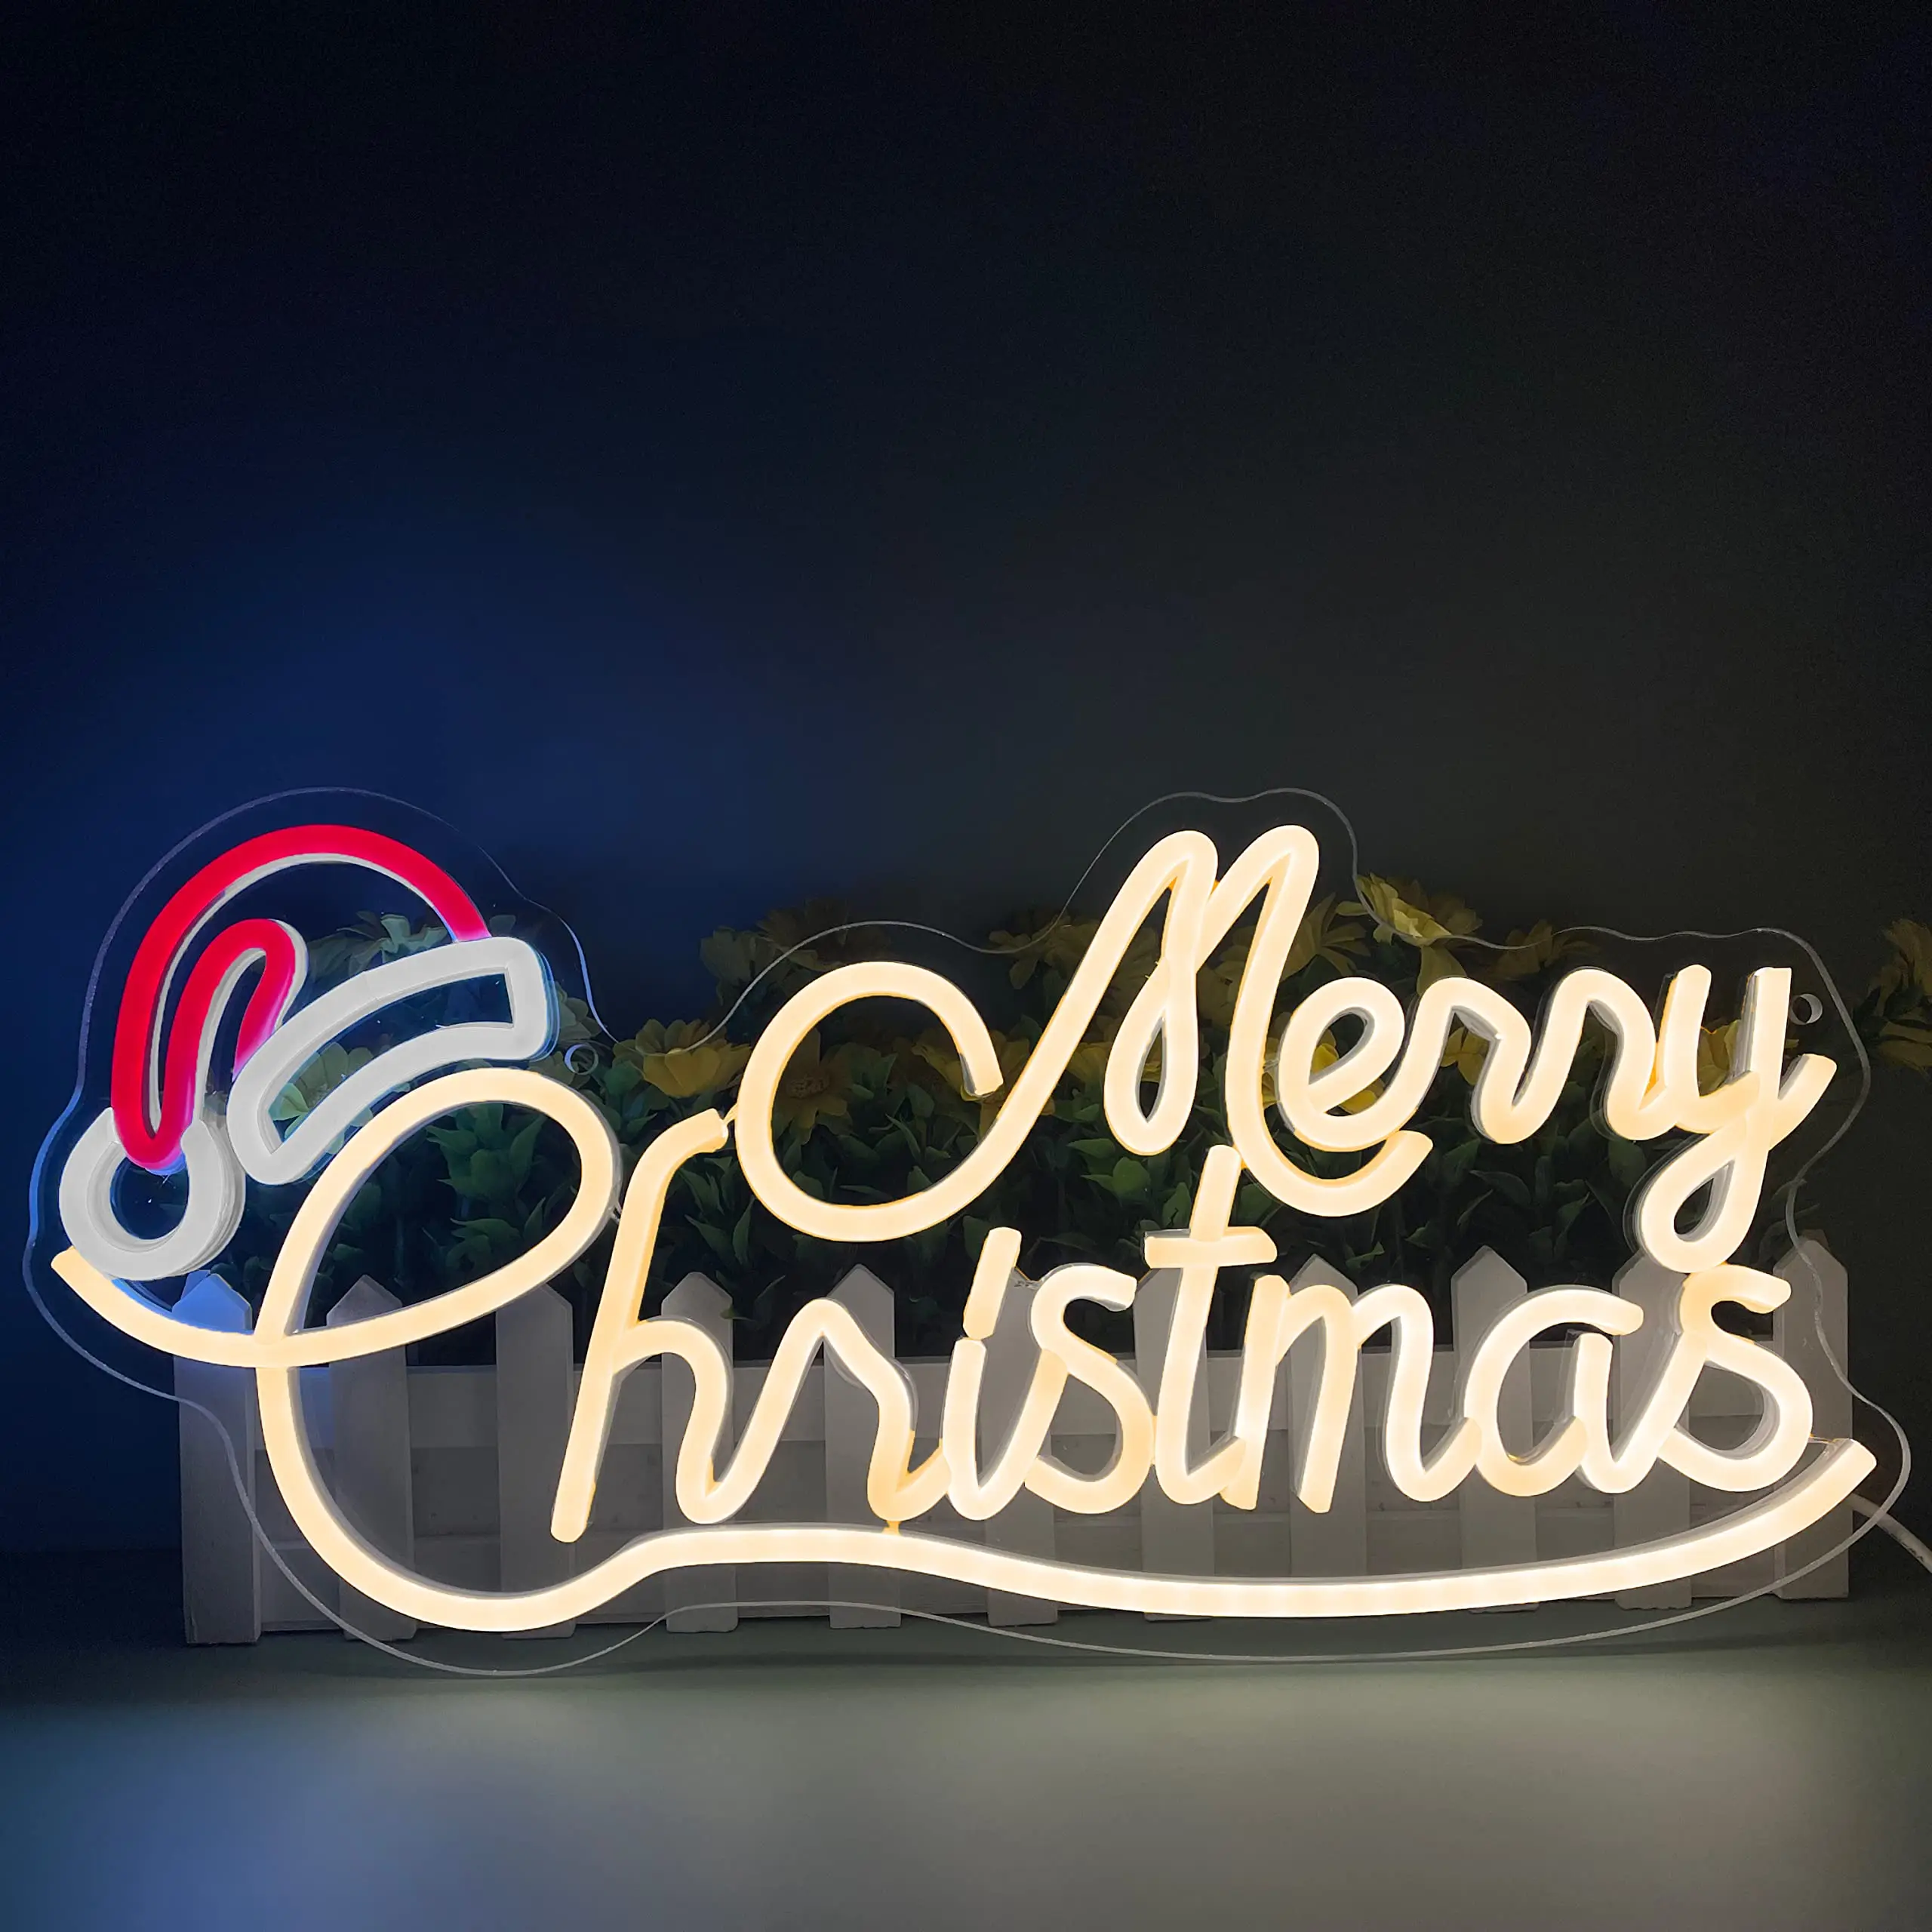 Merry Christmas Neon Sign Light Fashion Lamp for Celebrate Christmas Festival Decoration Old Man Neon Decor